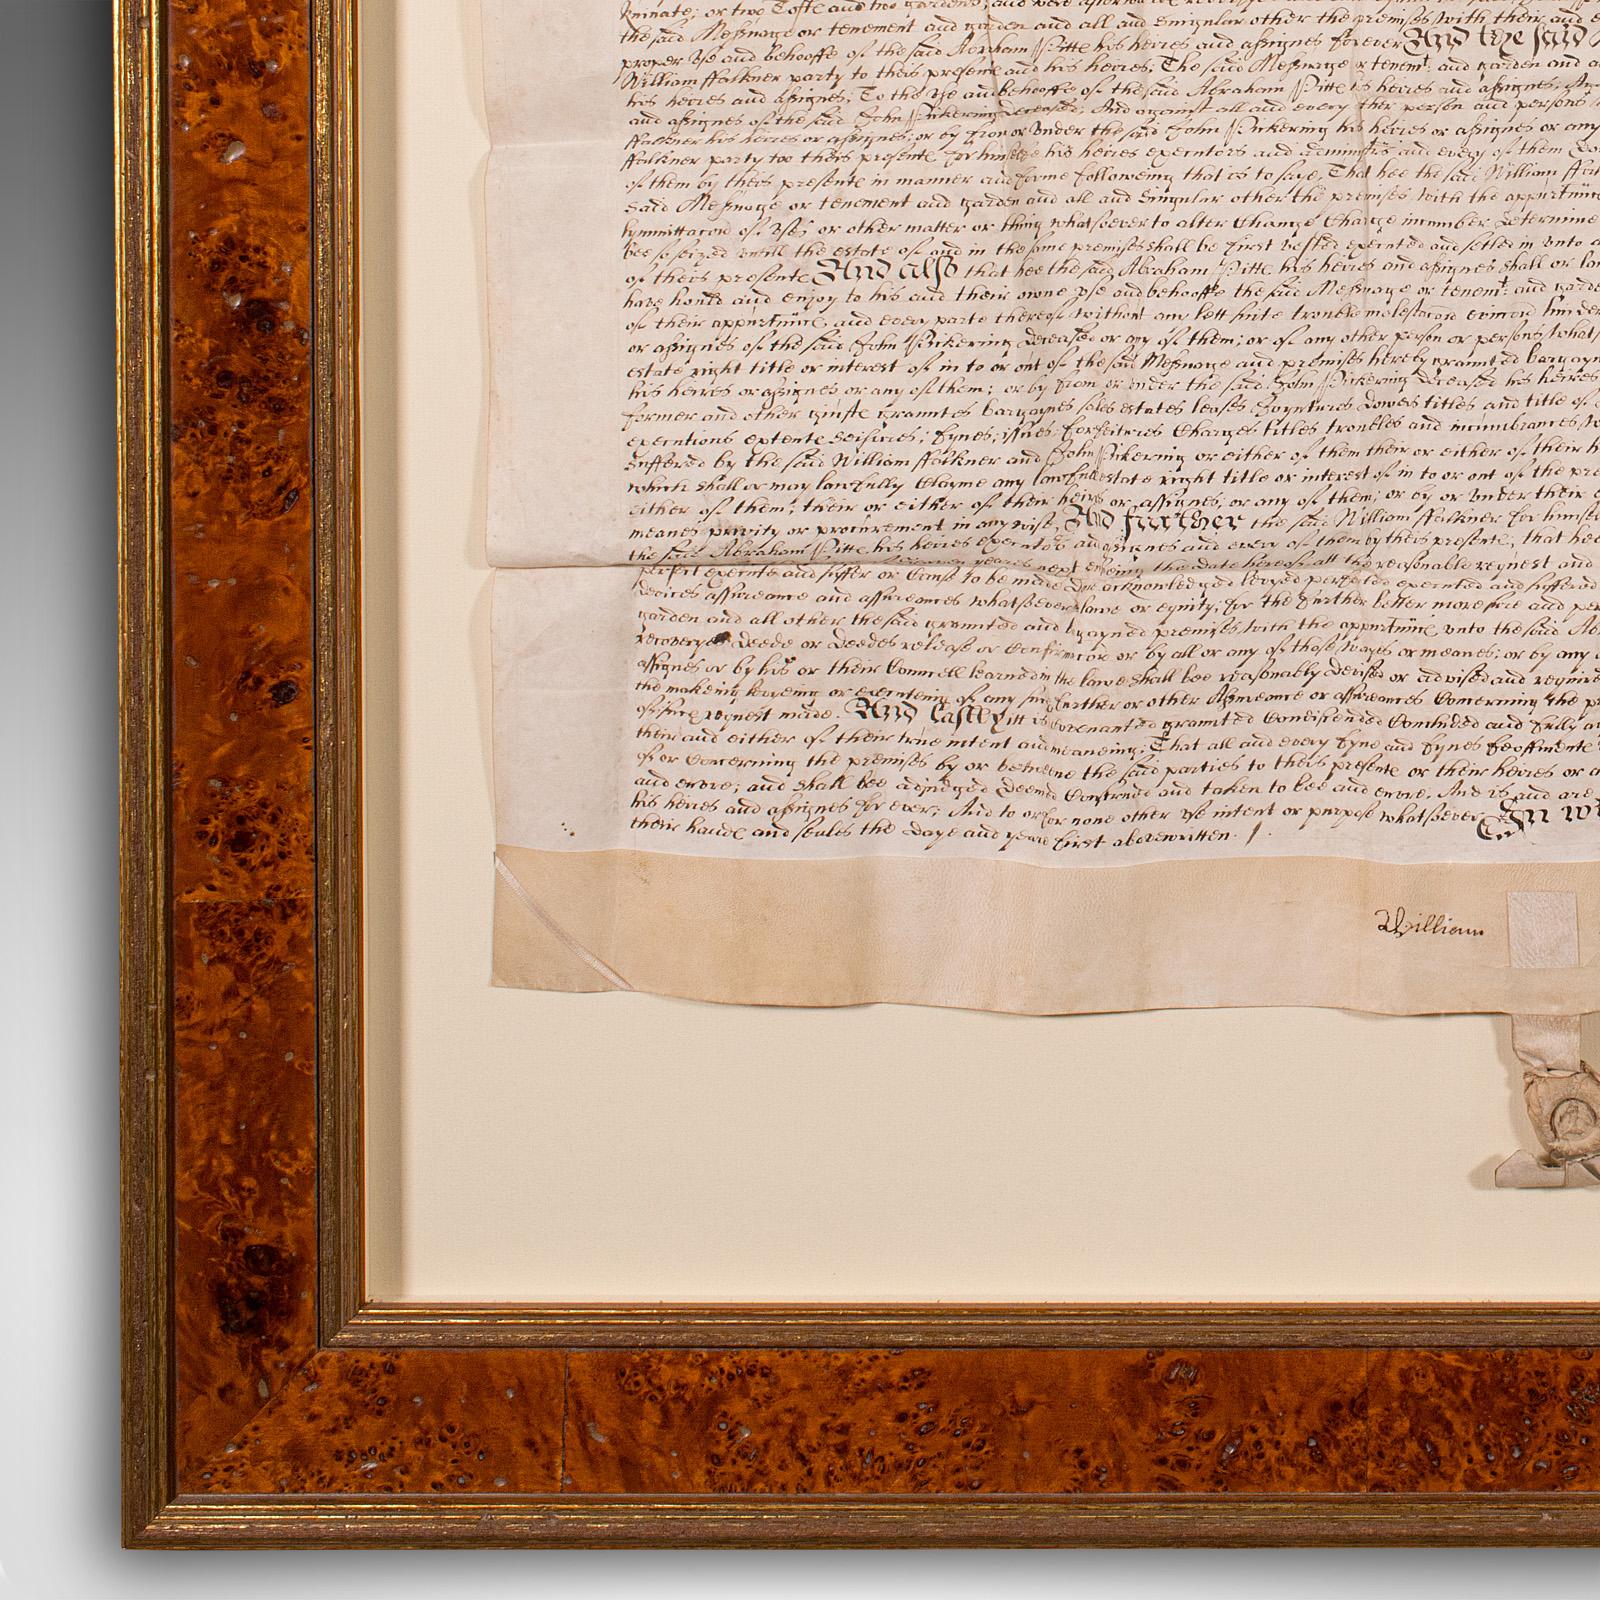 Animal Skin Antique Framed Indenture, English, Vellum, Document, 17th Century, Dated 1671 For Sale